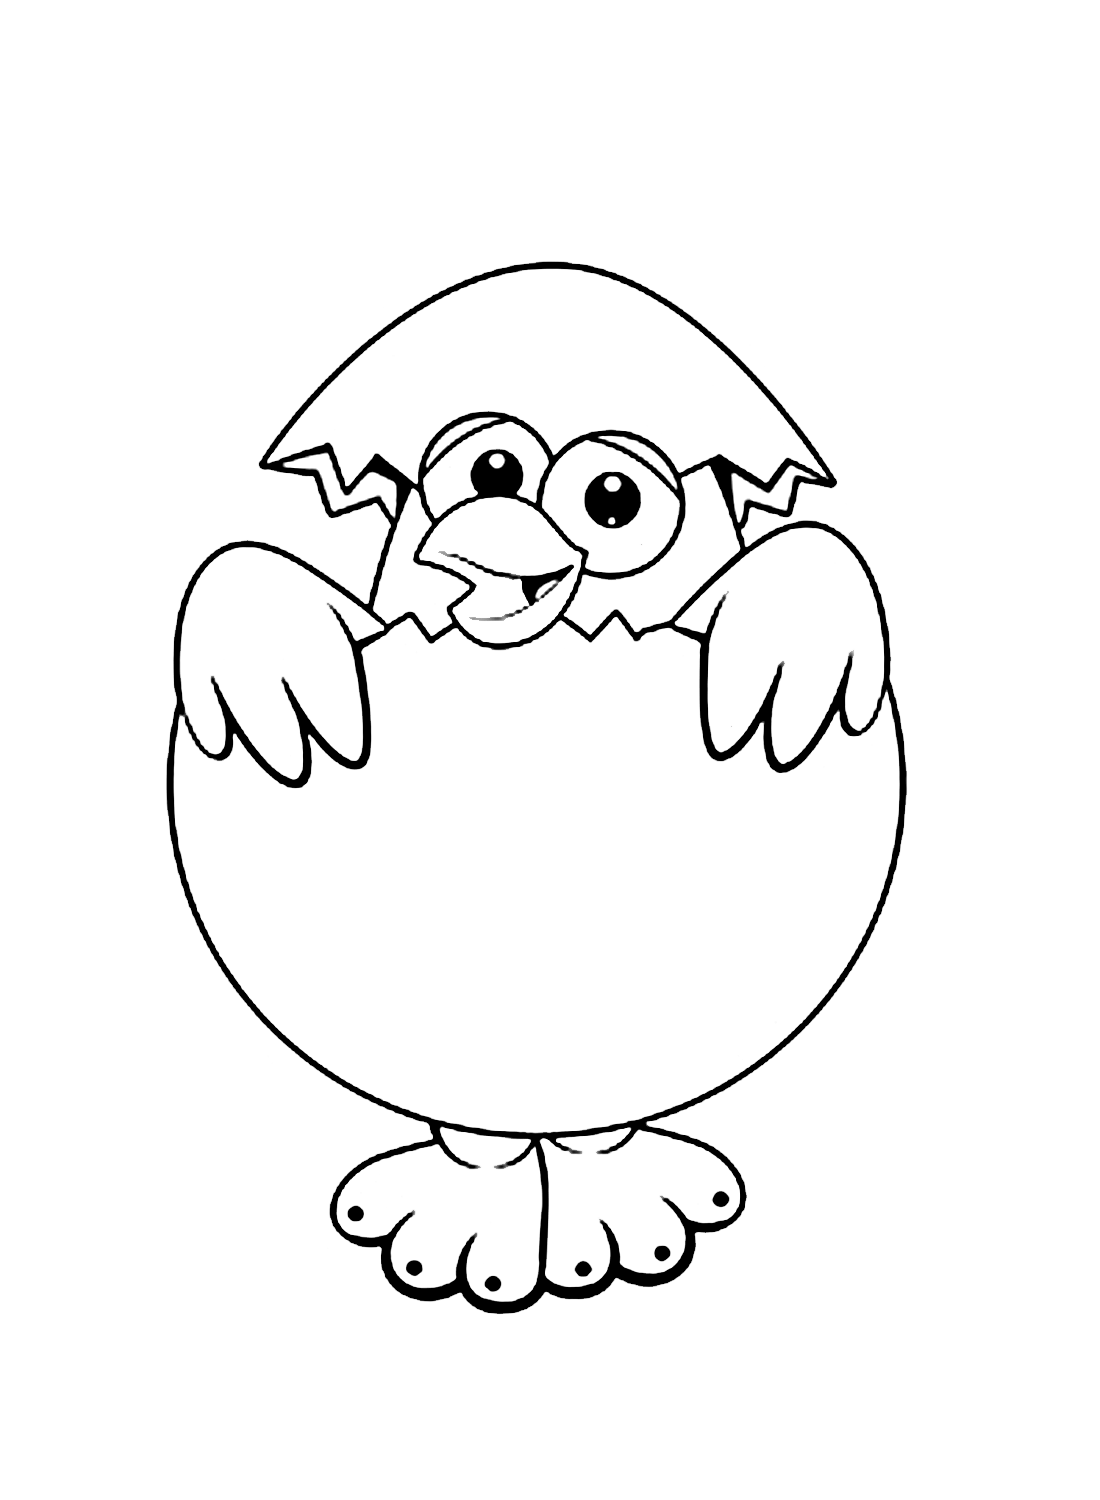 A newborn chick Coloring Pages